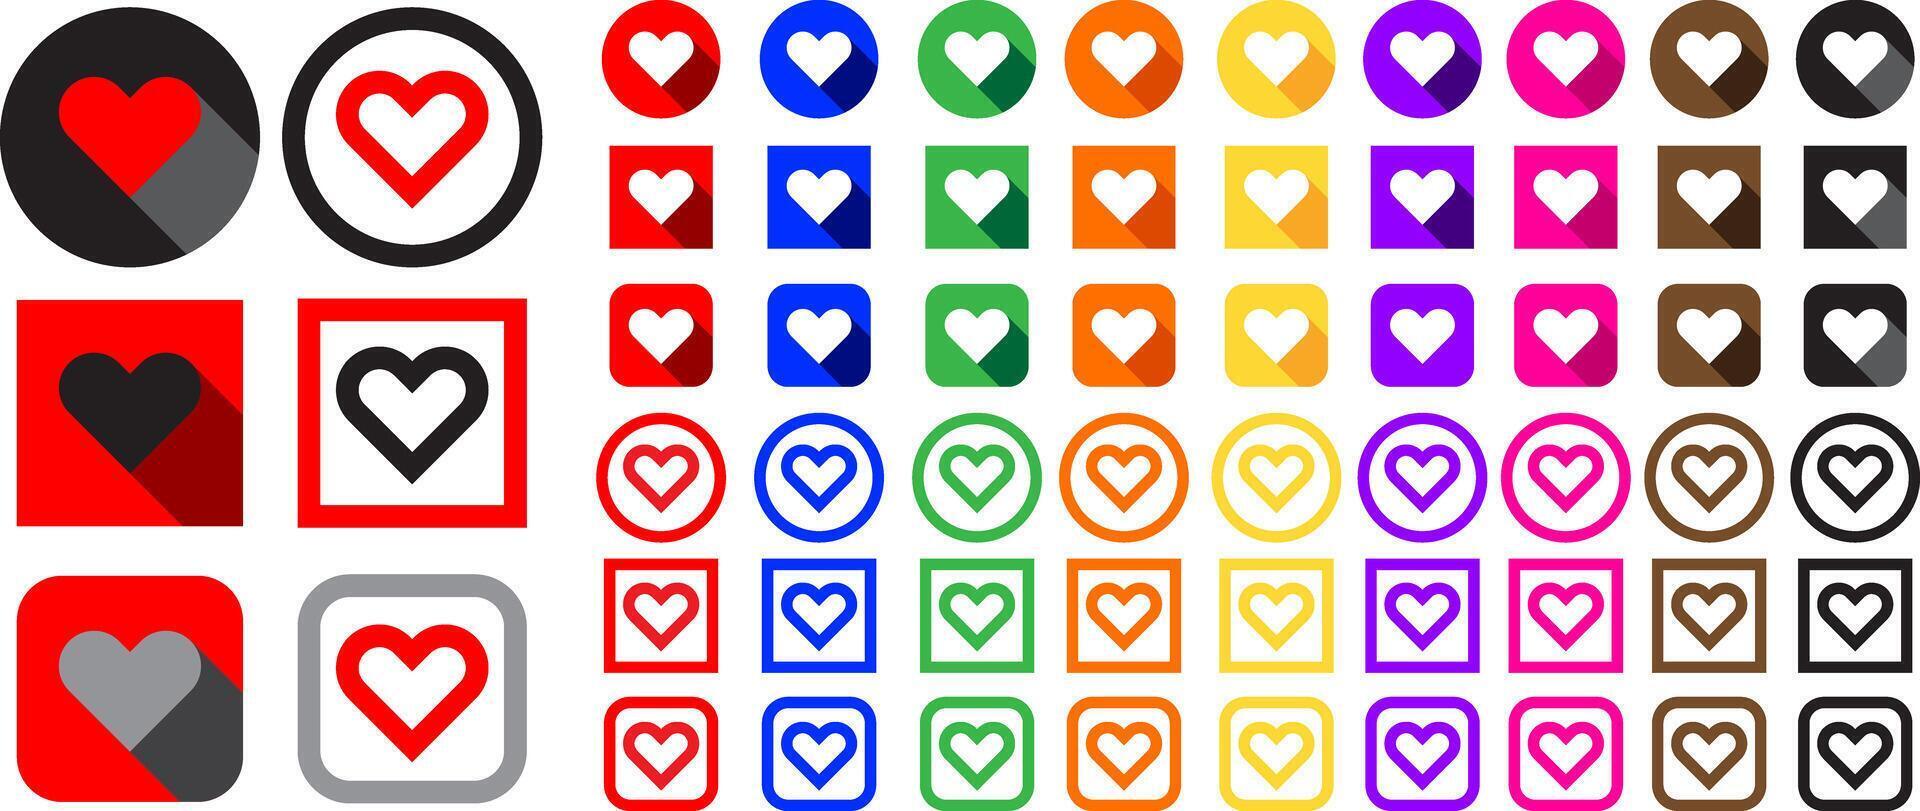 Love Heart Icons collection with solid flat and outline design with abstract shadow for love related designs and valentine vector